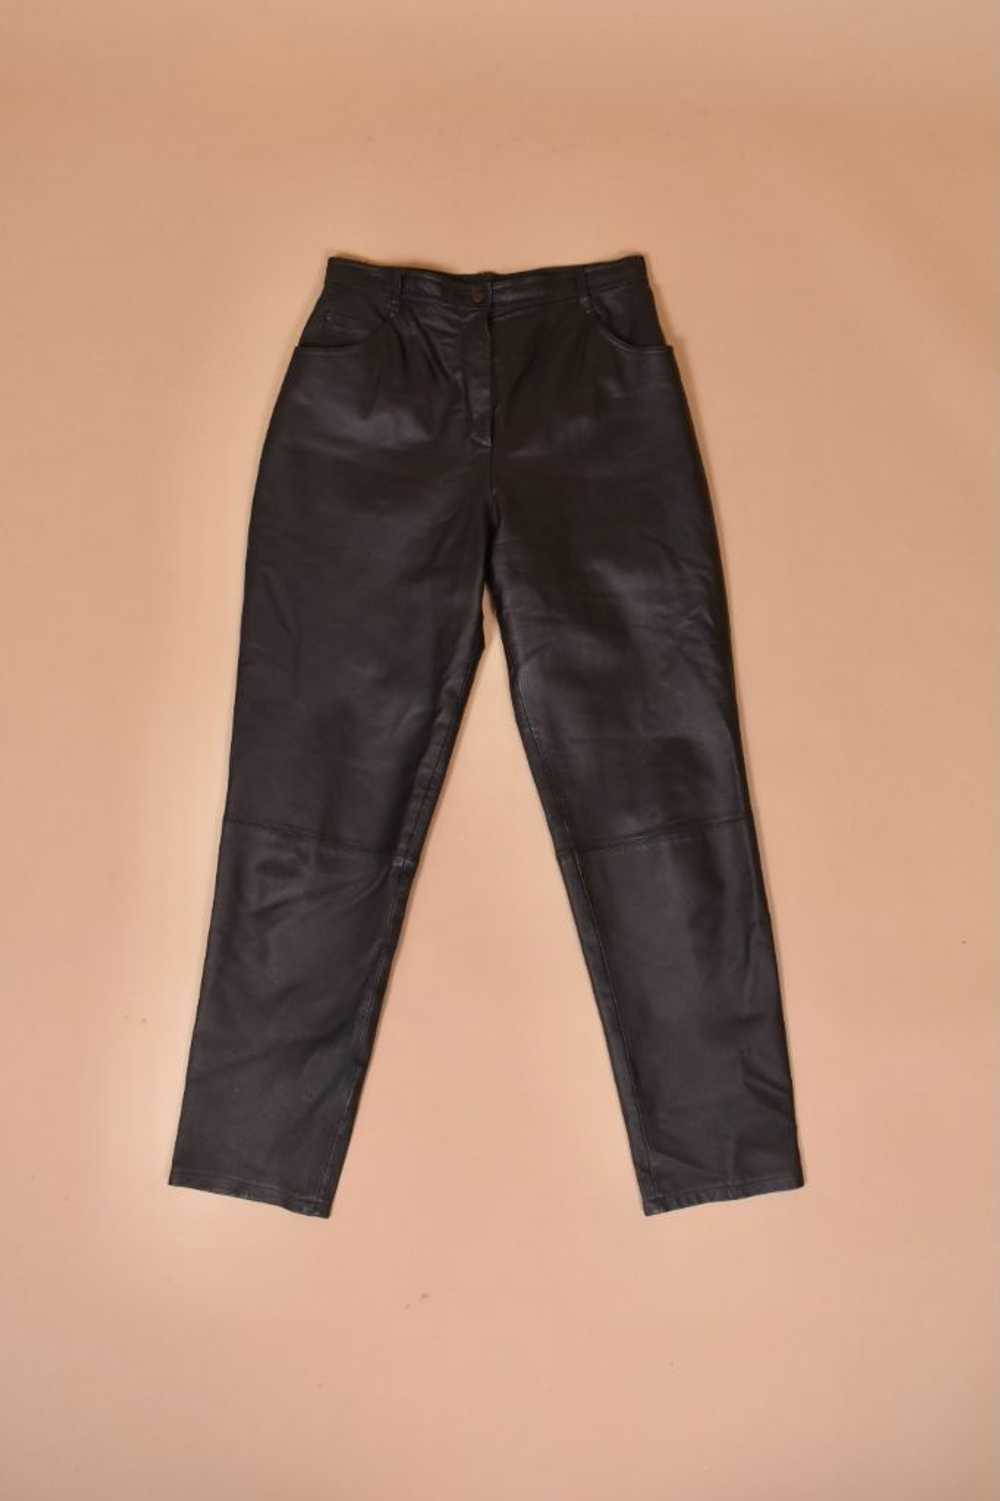 Black High Rise Leather Pants By Marie Claire, L - image 5